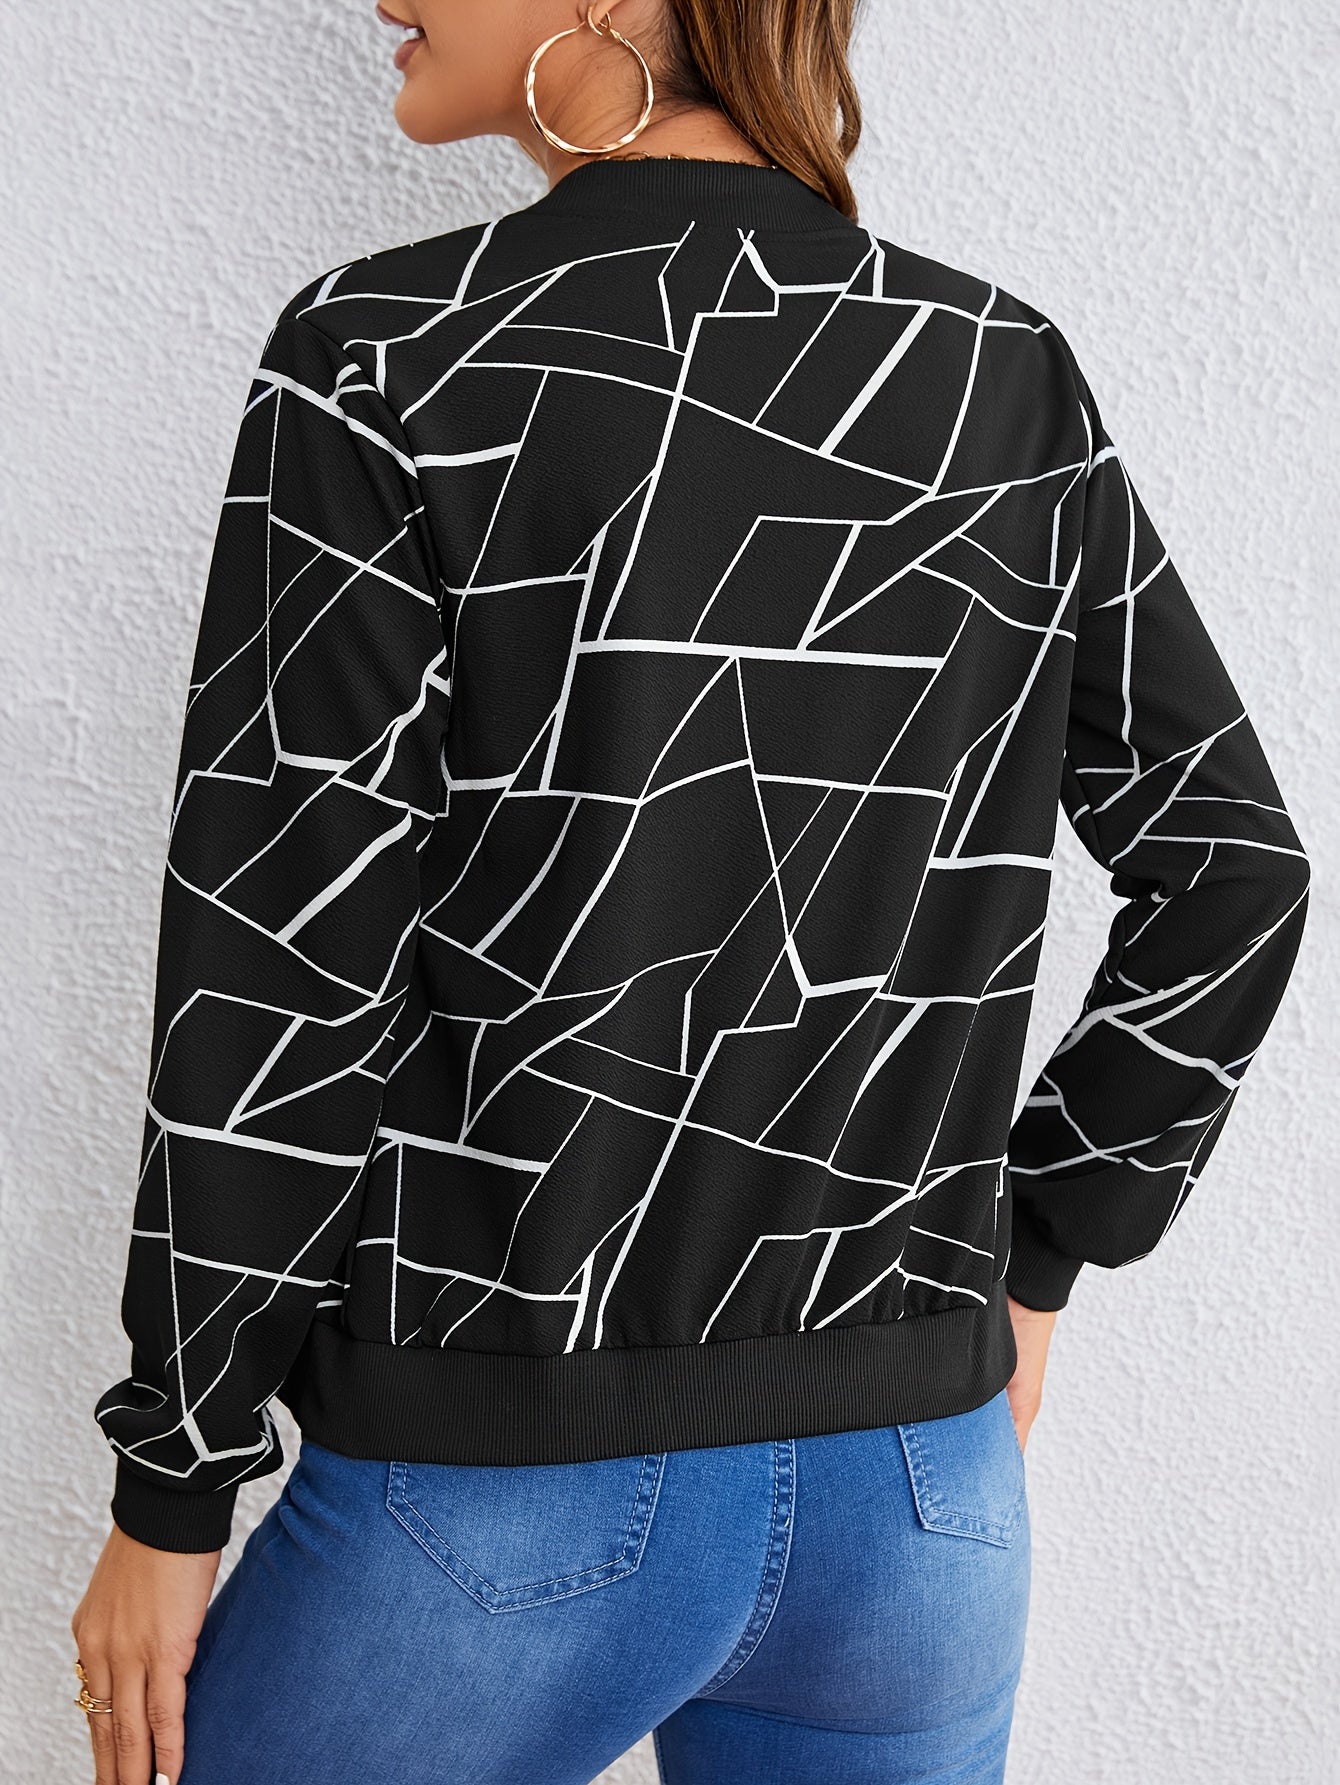 Geo Print Zipper Front Jacket, Casual Long Sleeve Jacket For Spring & Fall, Women's Clothing